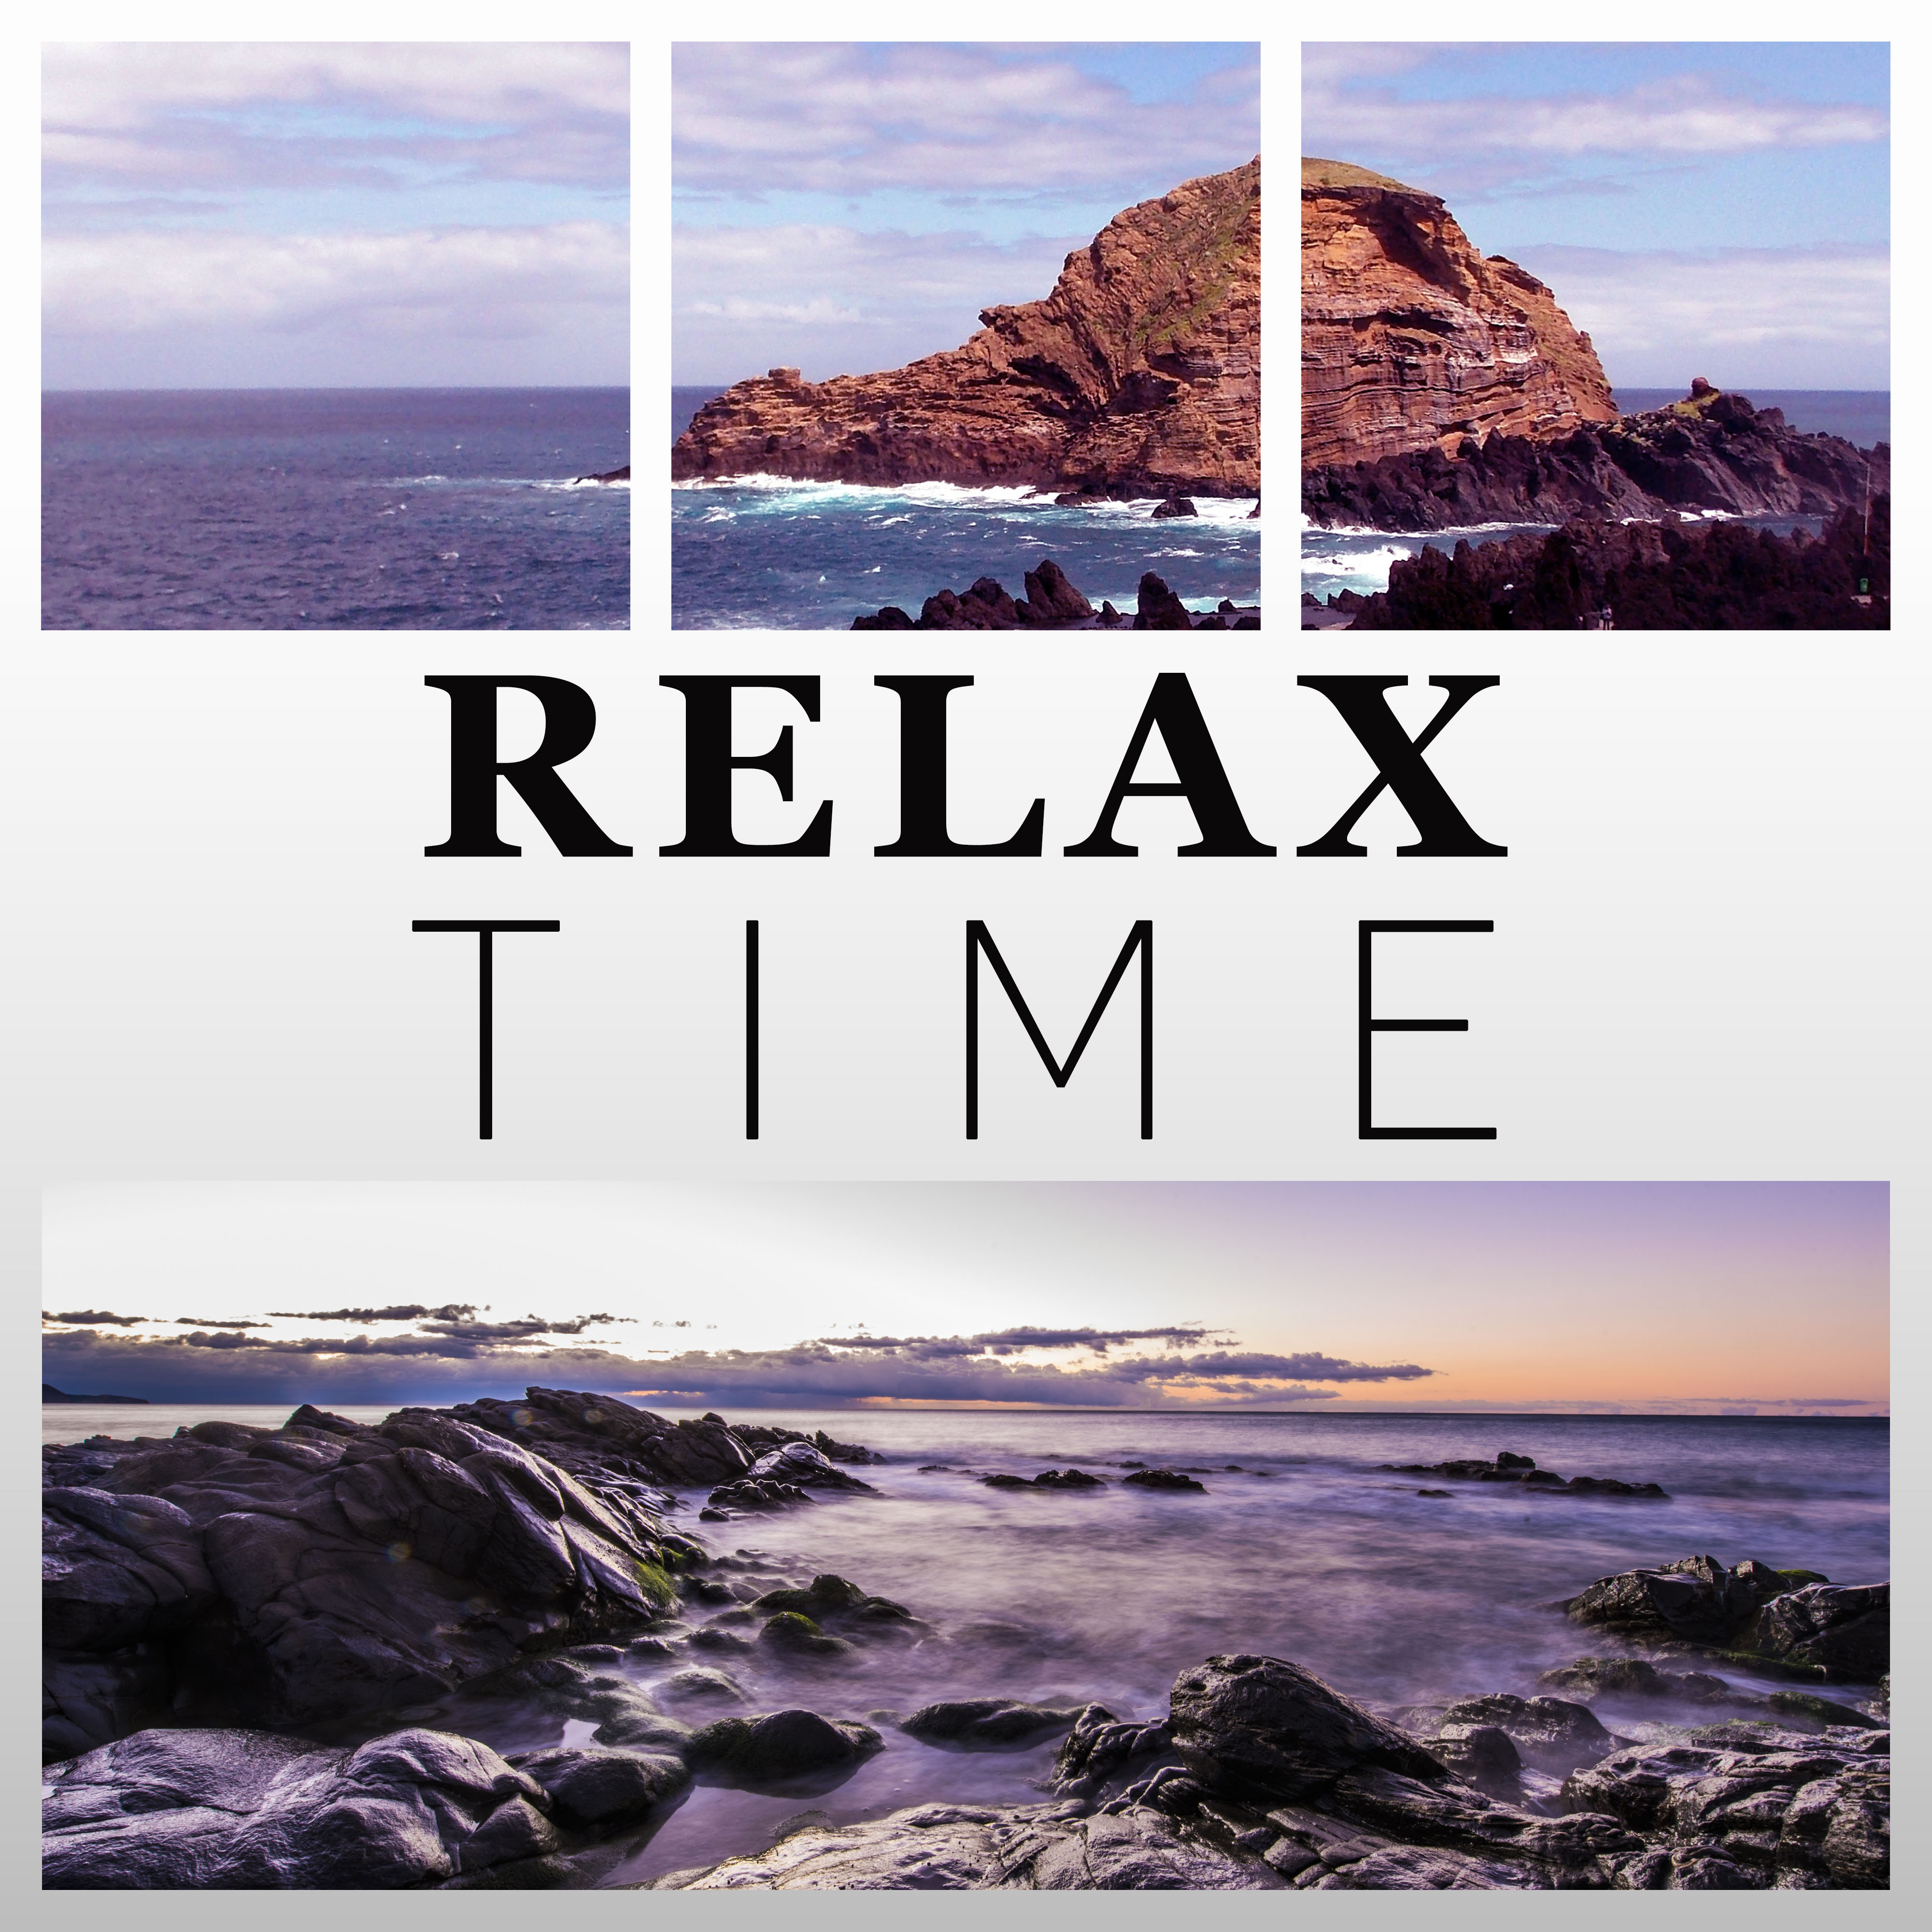 Relax Time  Deep Relaxation in Your Free Time, Wellness Center, Spa Treatment, Detente Music for Massage, Soothe Your Body  Soul, Buddha Lounge and Zen Room